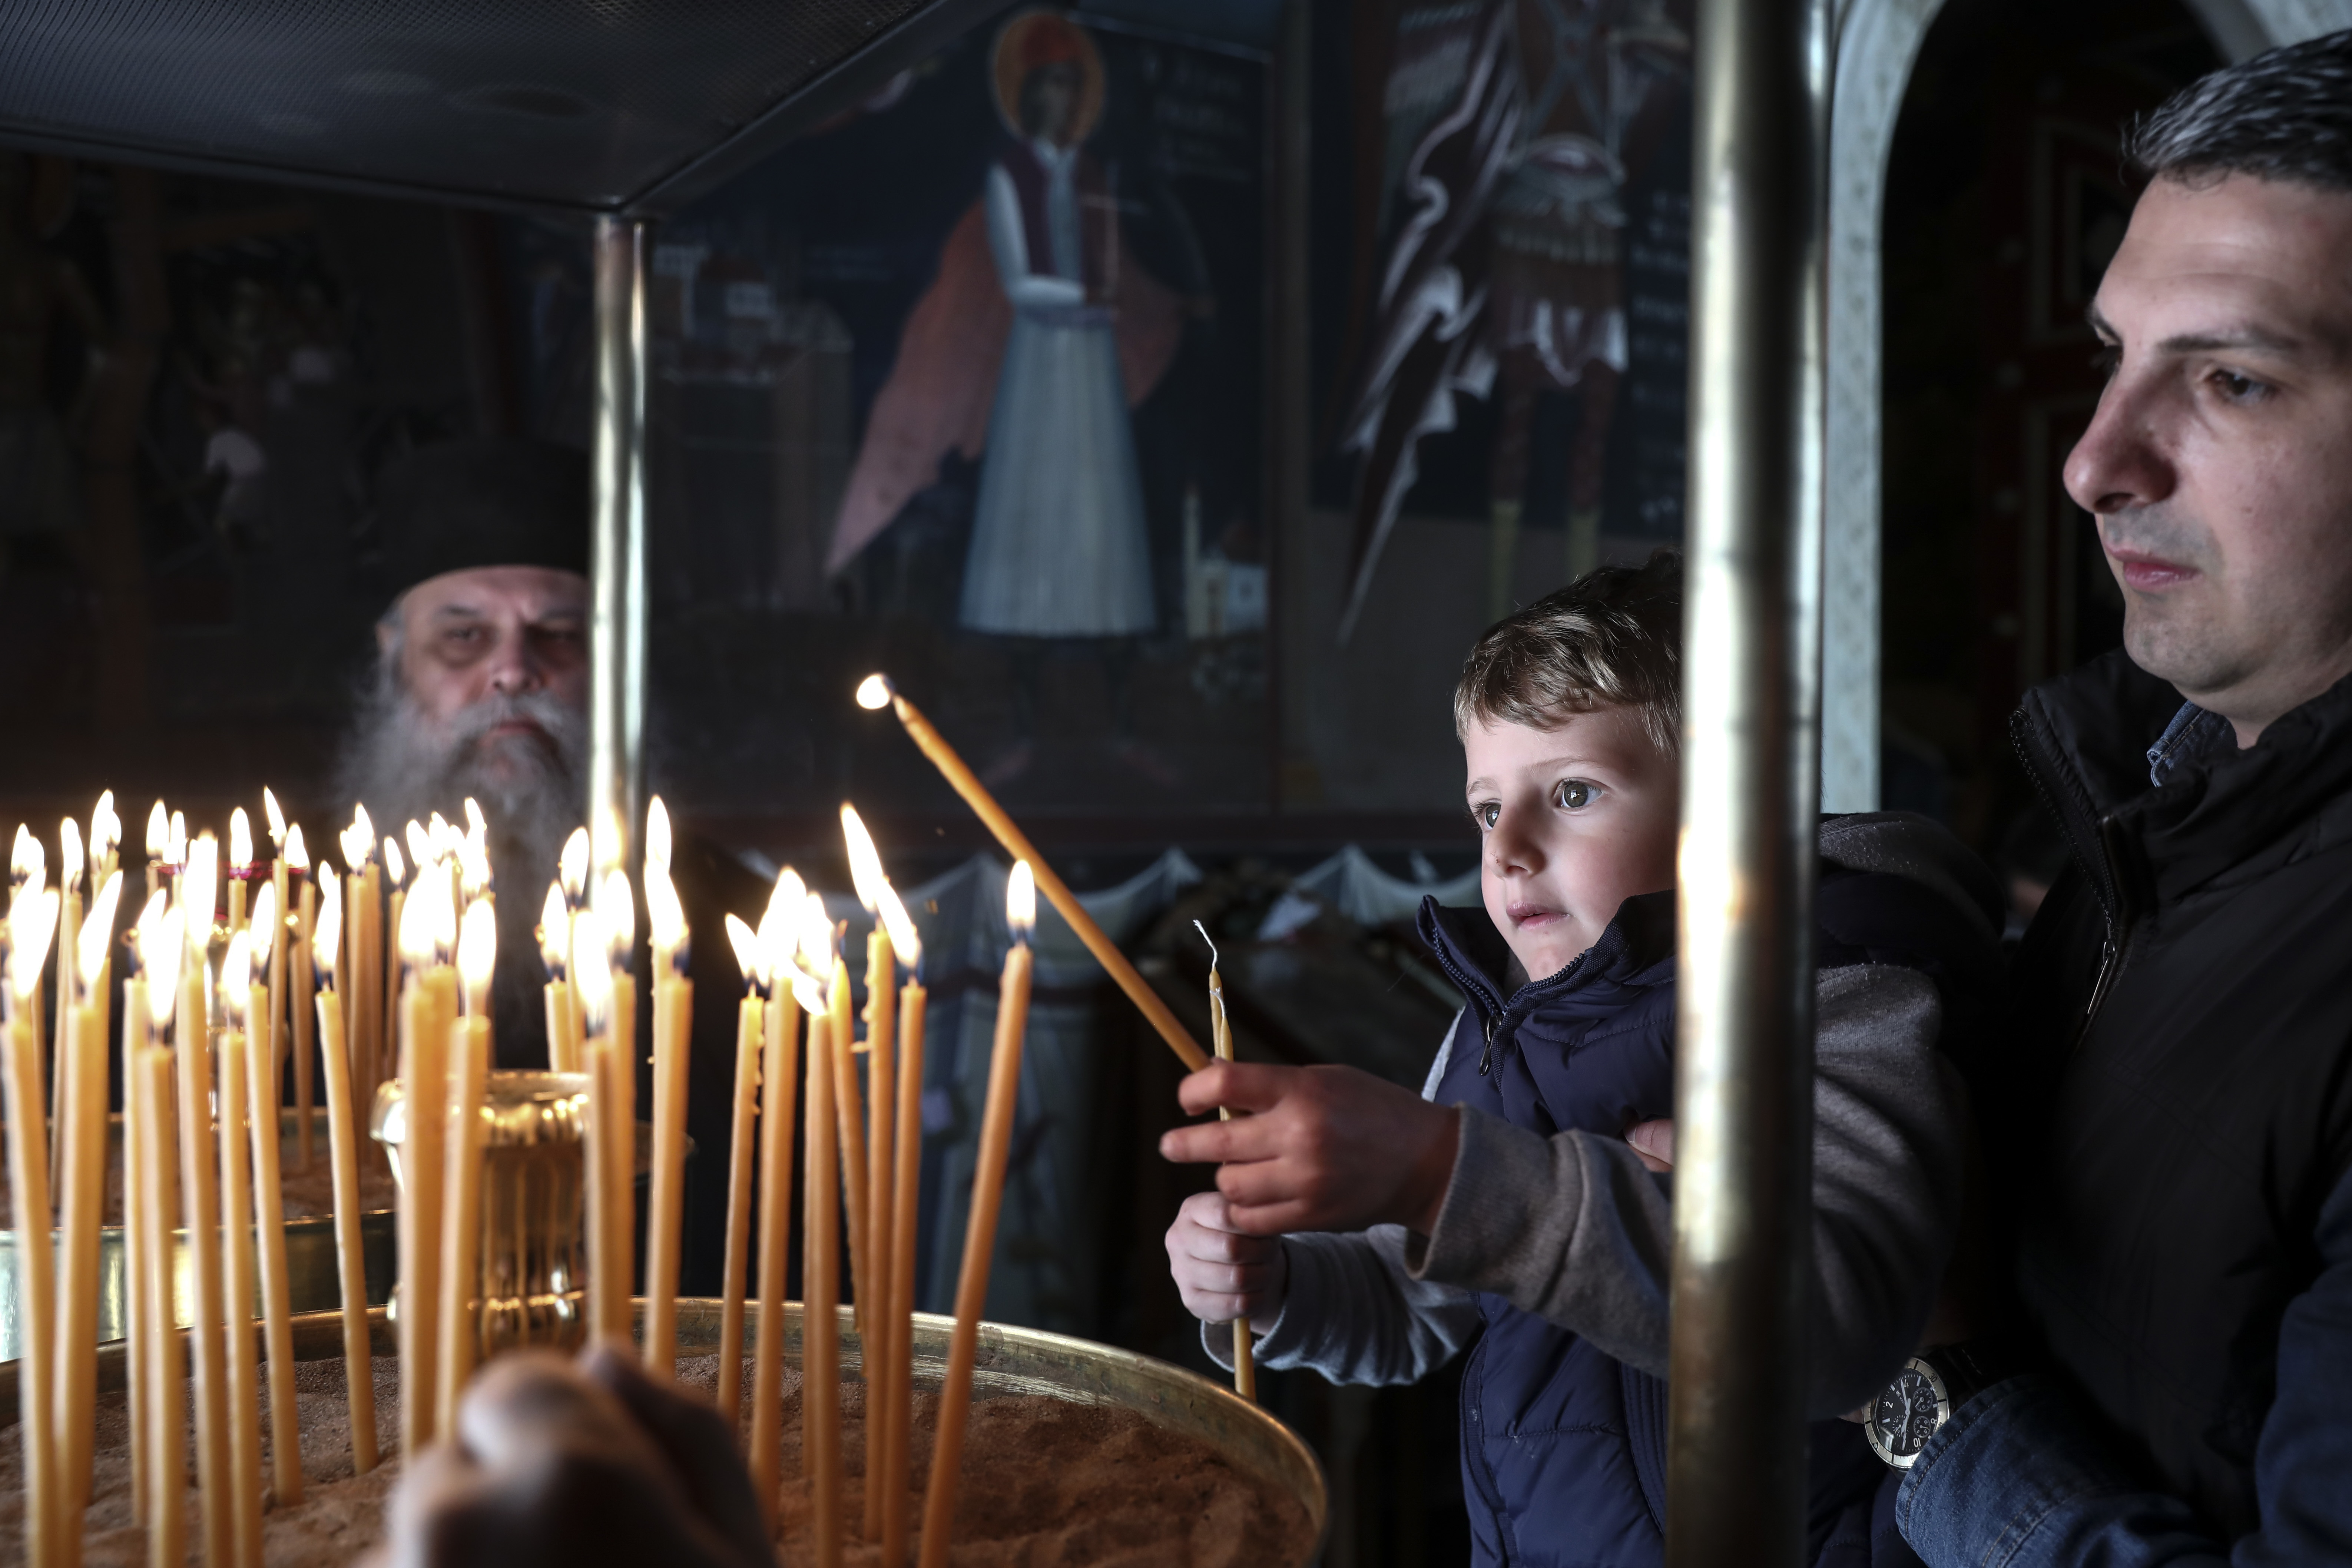 A boy lights a candle during a Good Friday Mass, at the Pendeli Monastery, near Athens, on Friday, April 6, 2018. Orthodox Christians around the world celebrate Easter on Sunday, April 8. (AP Photo/Yorgos Karahalis)